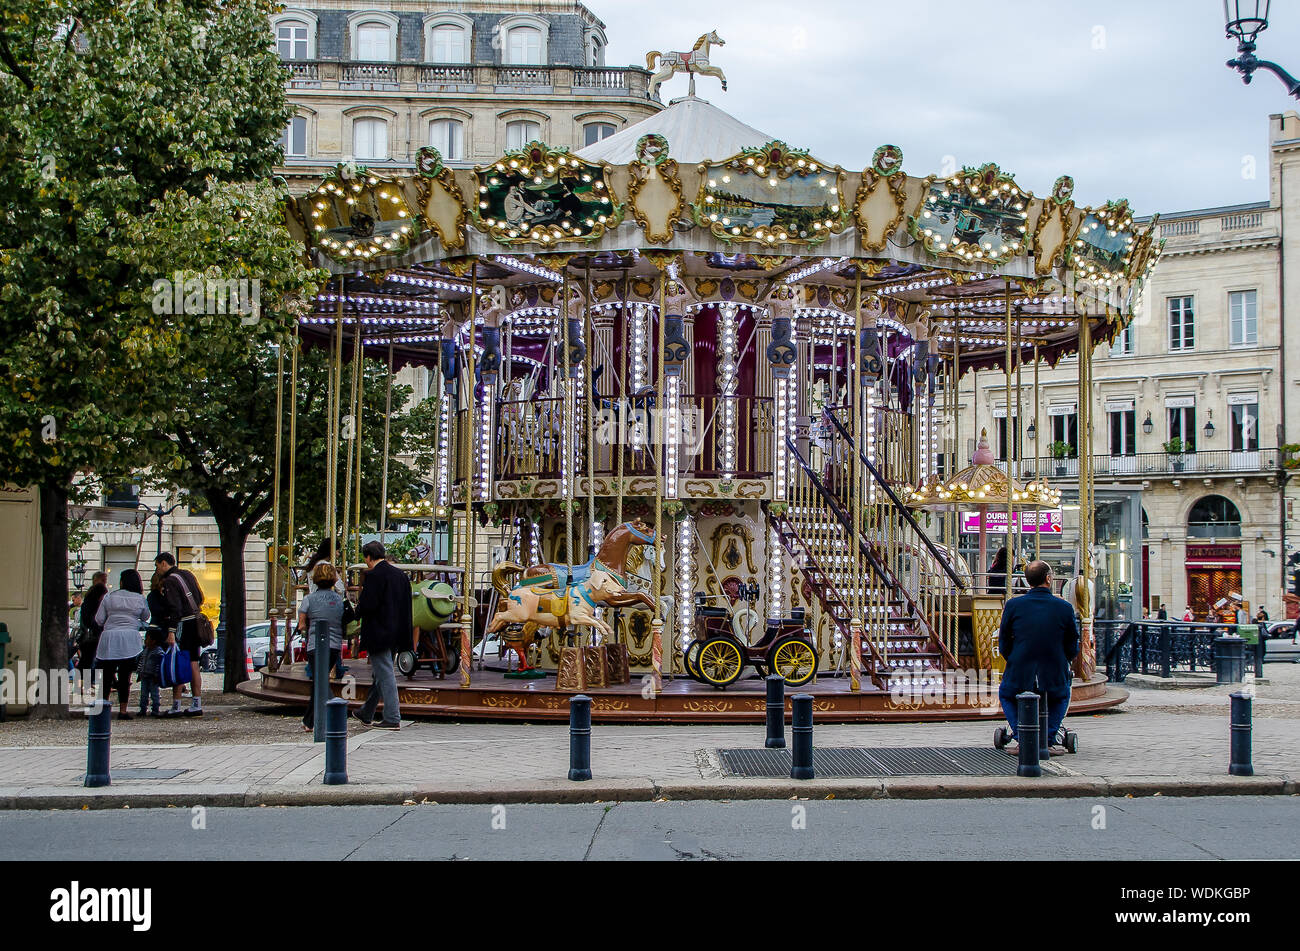 Beautiful children's carousel in the city of Bordeaux in September 2013. France Stock Photo